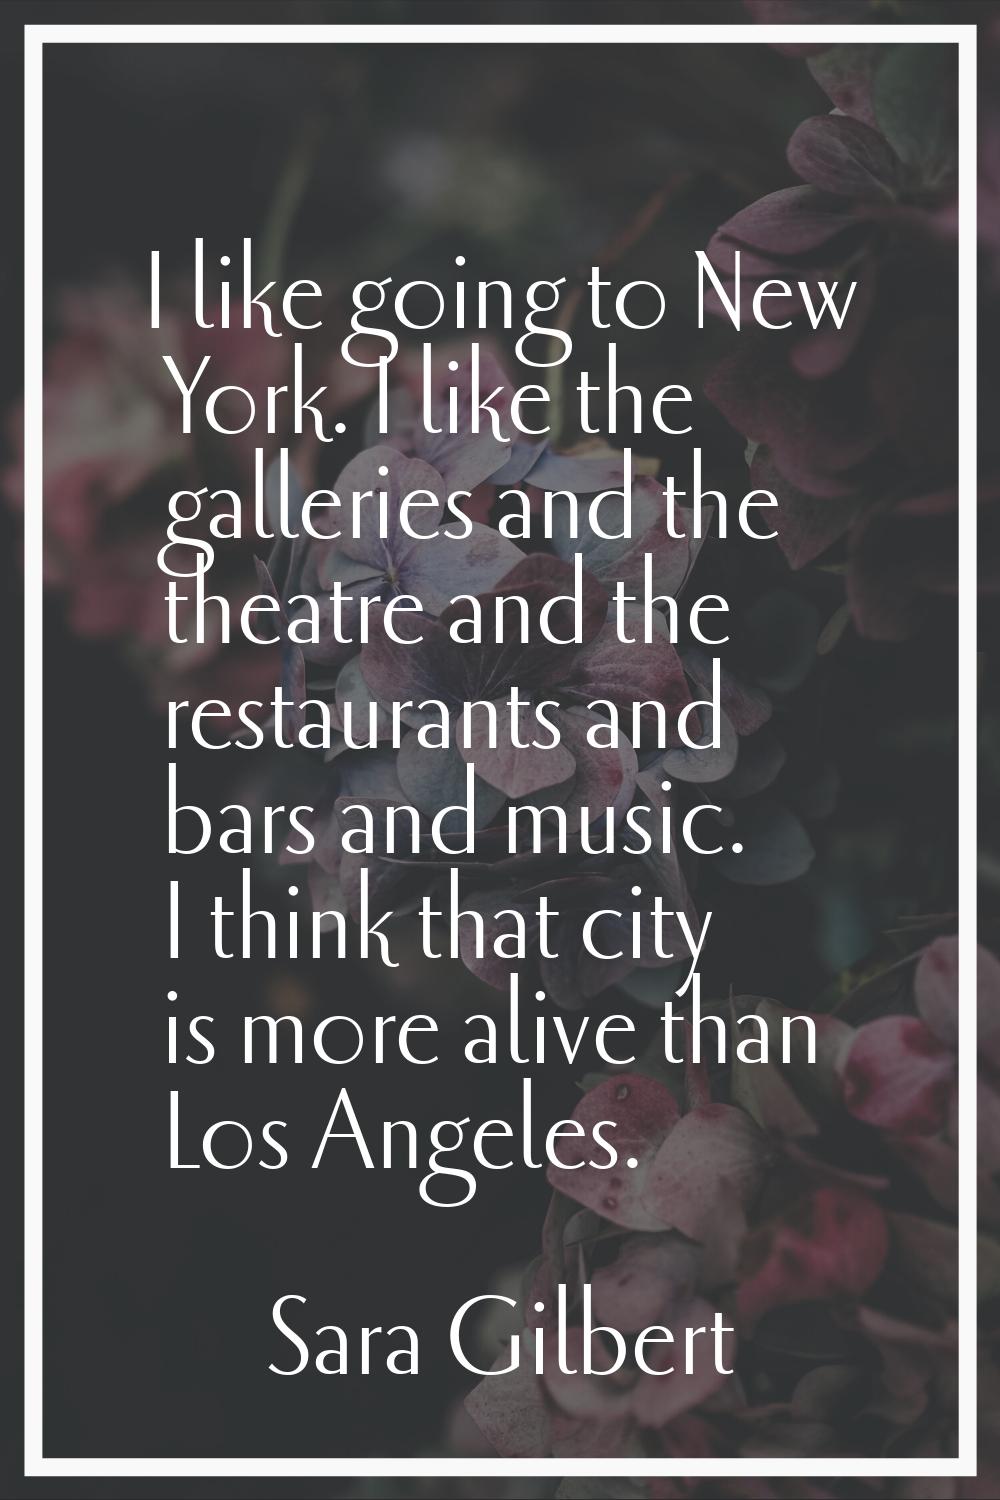 I like going to New York. I like the galleries and the theatre and the restaurants and bars and mus